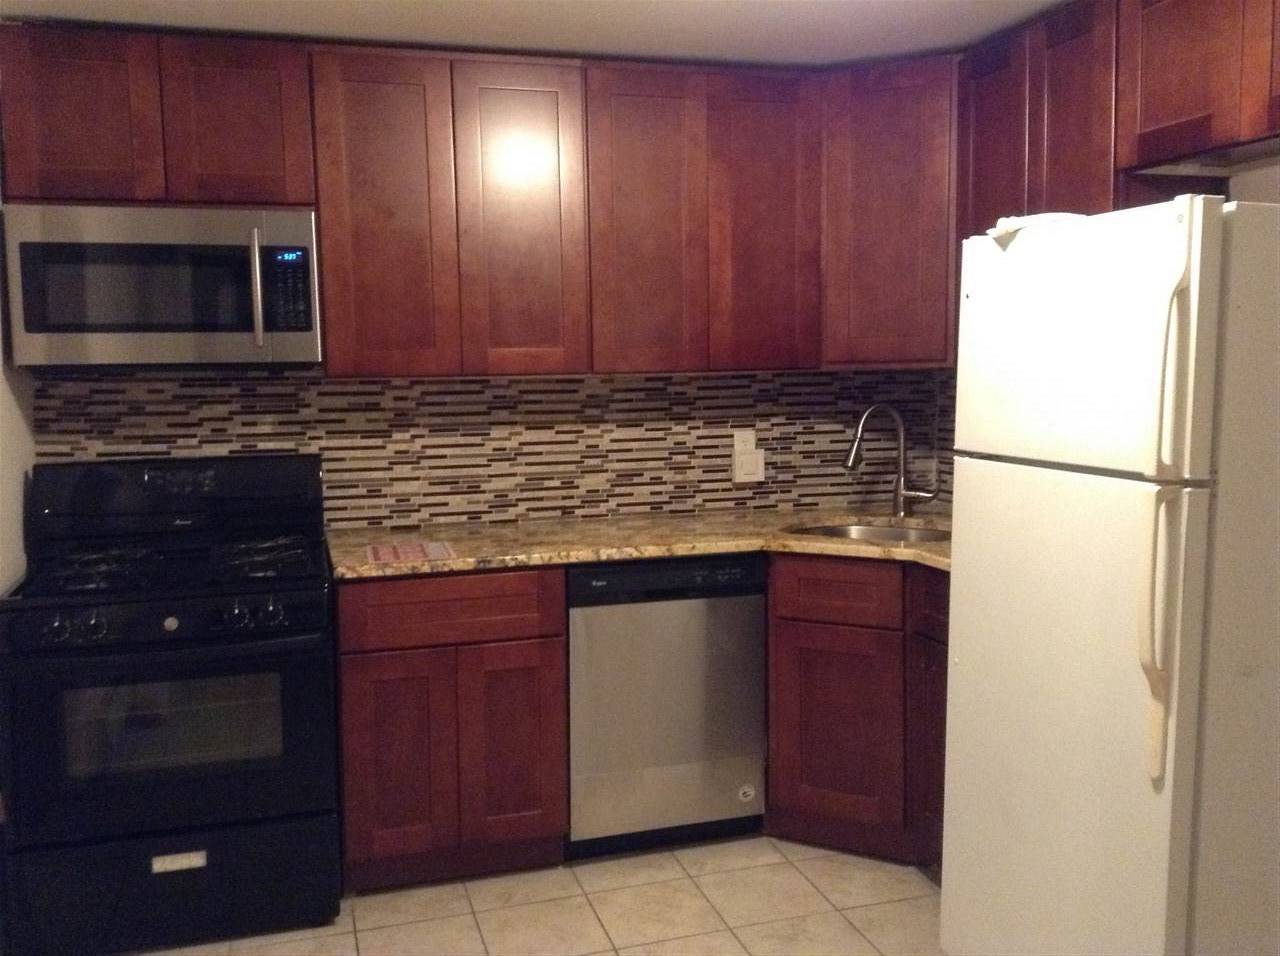 EXCELLENT LOCATION APARTMENT CLOSE TO THE PATH - 3 BR New Jersey